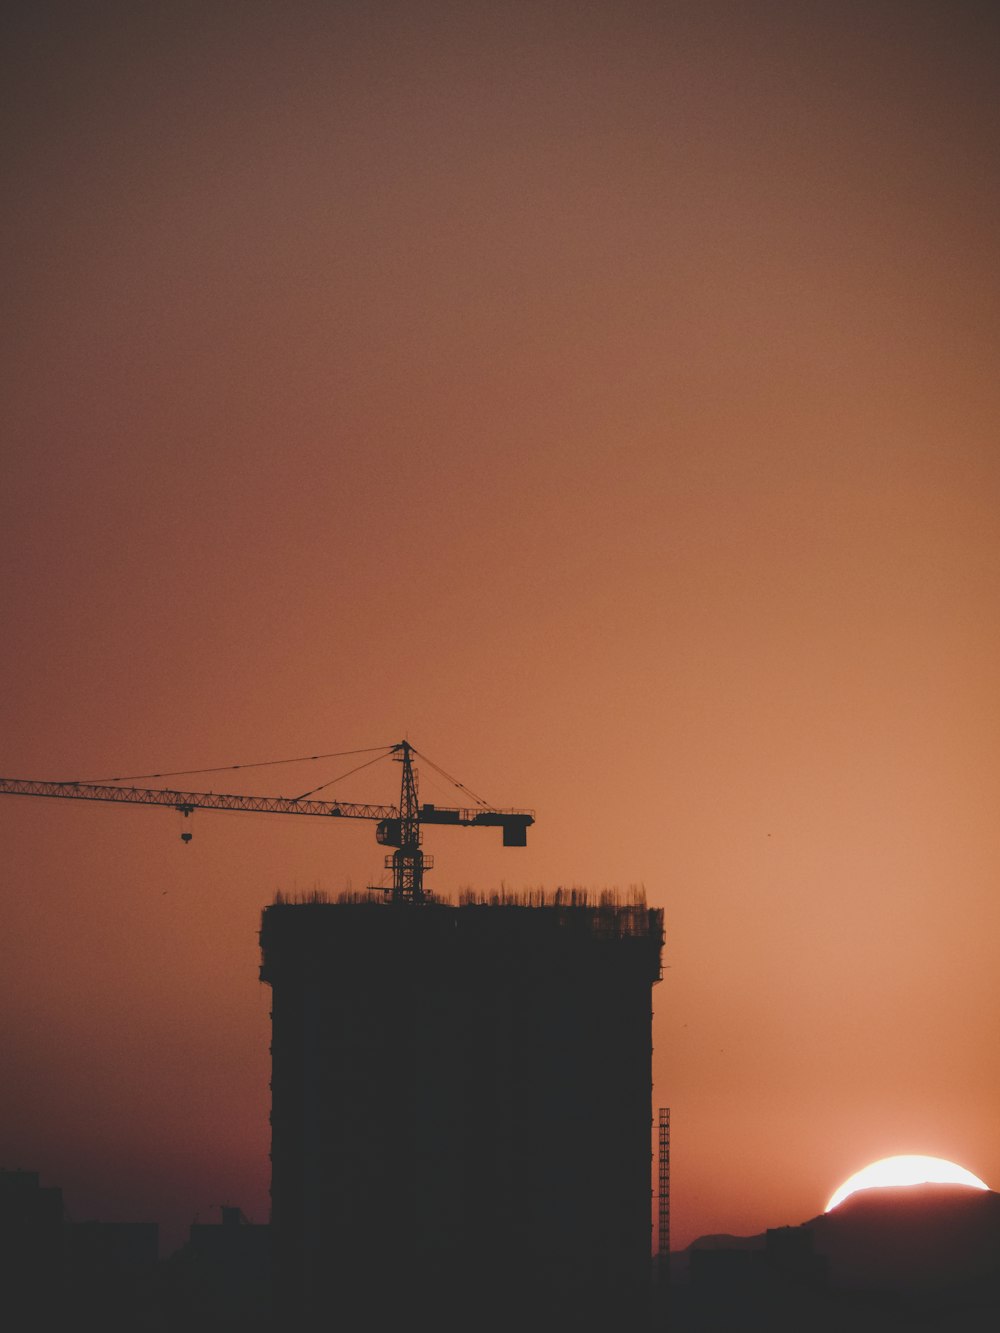 silhouette building and crane during golden hour